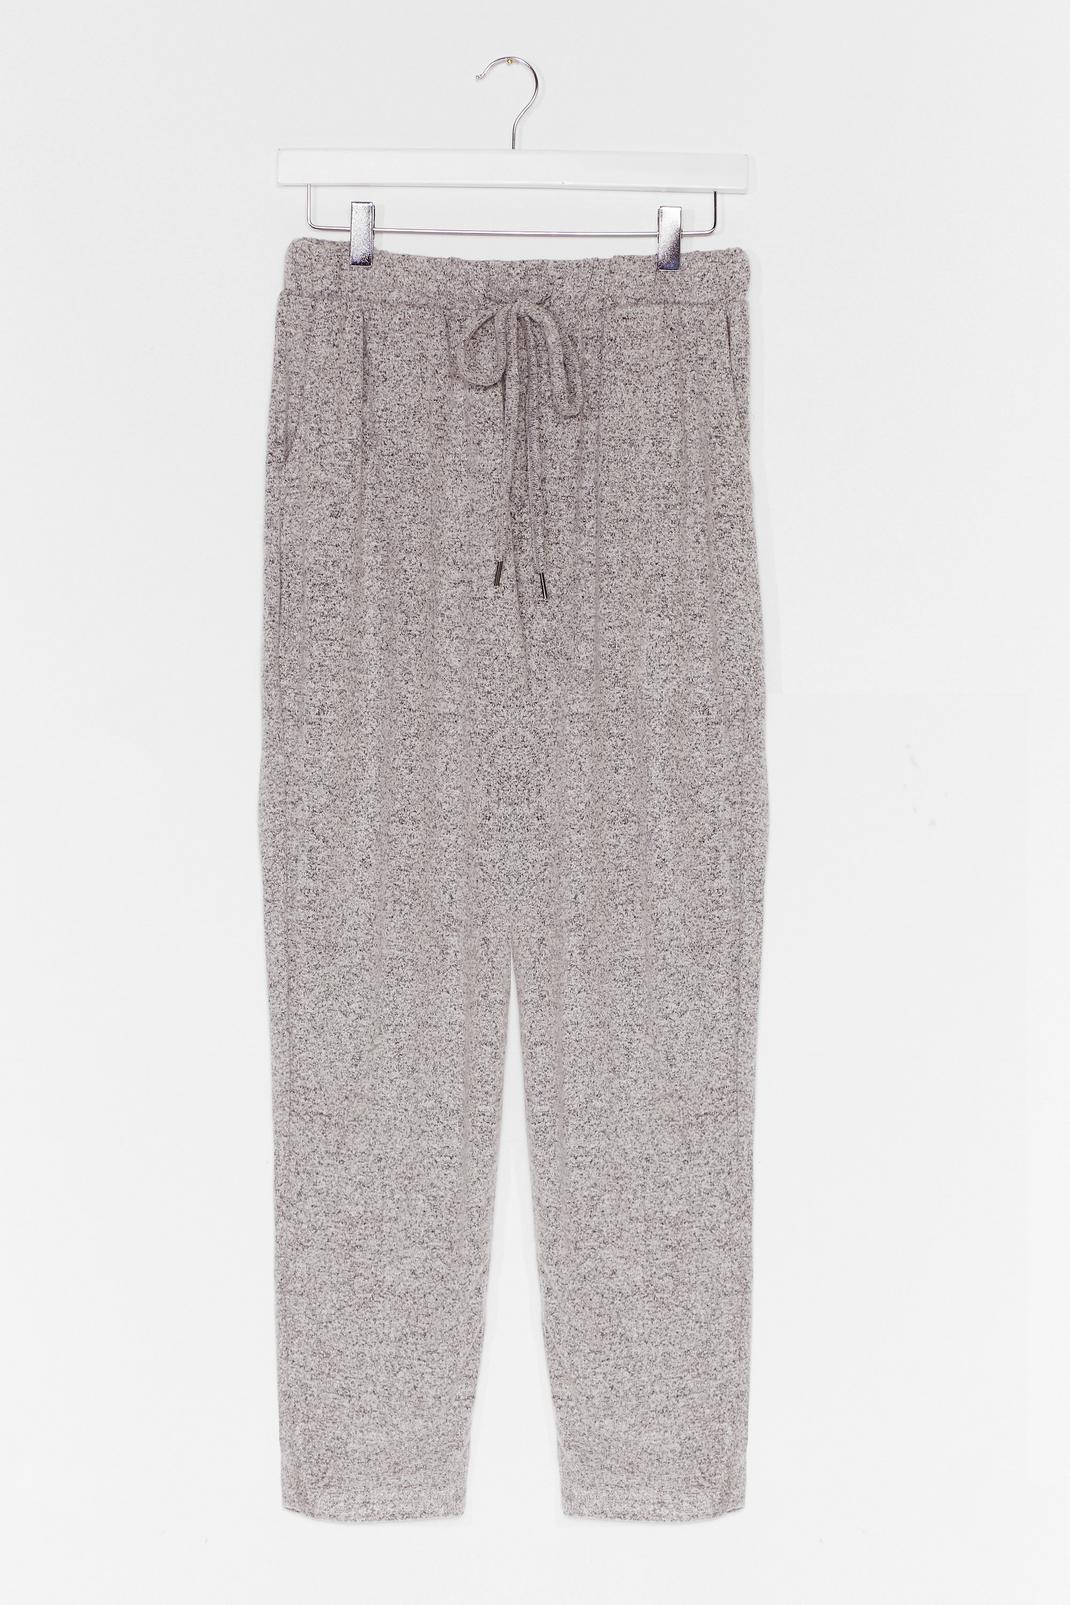 Grey Marl Slouchy Loungewear Tracksuit Pants image number 1